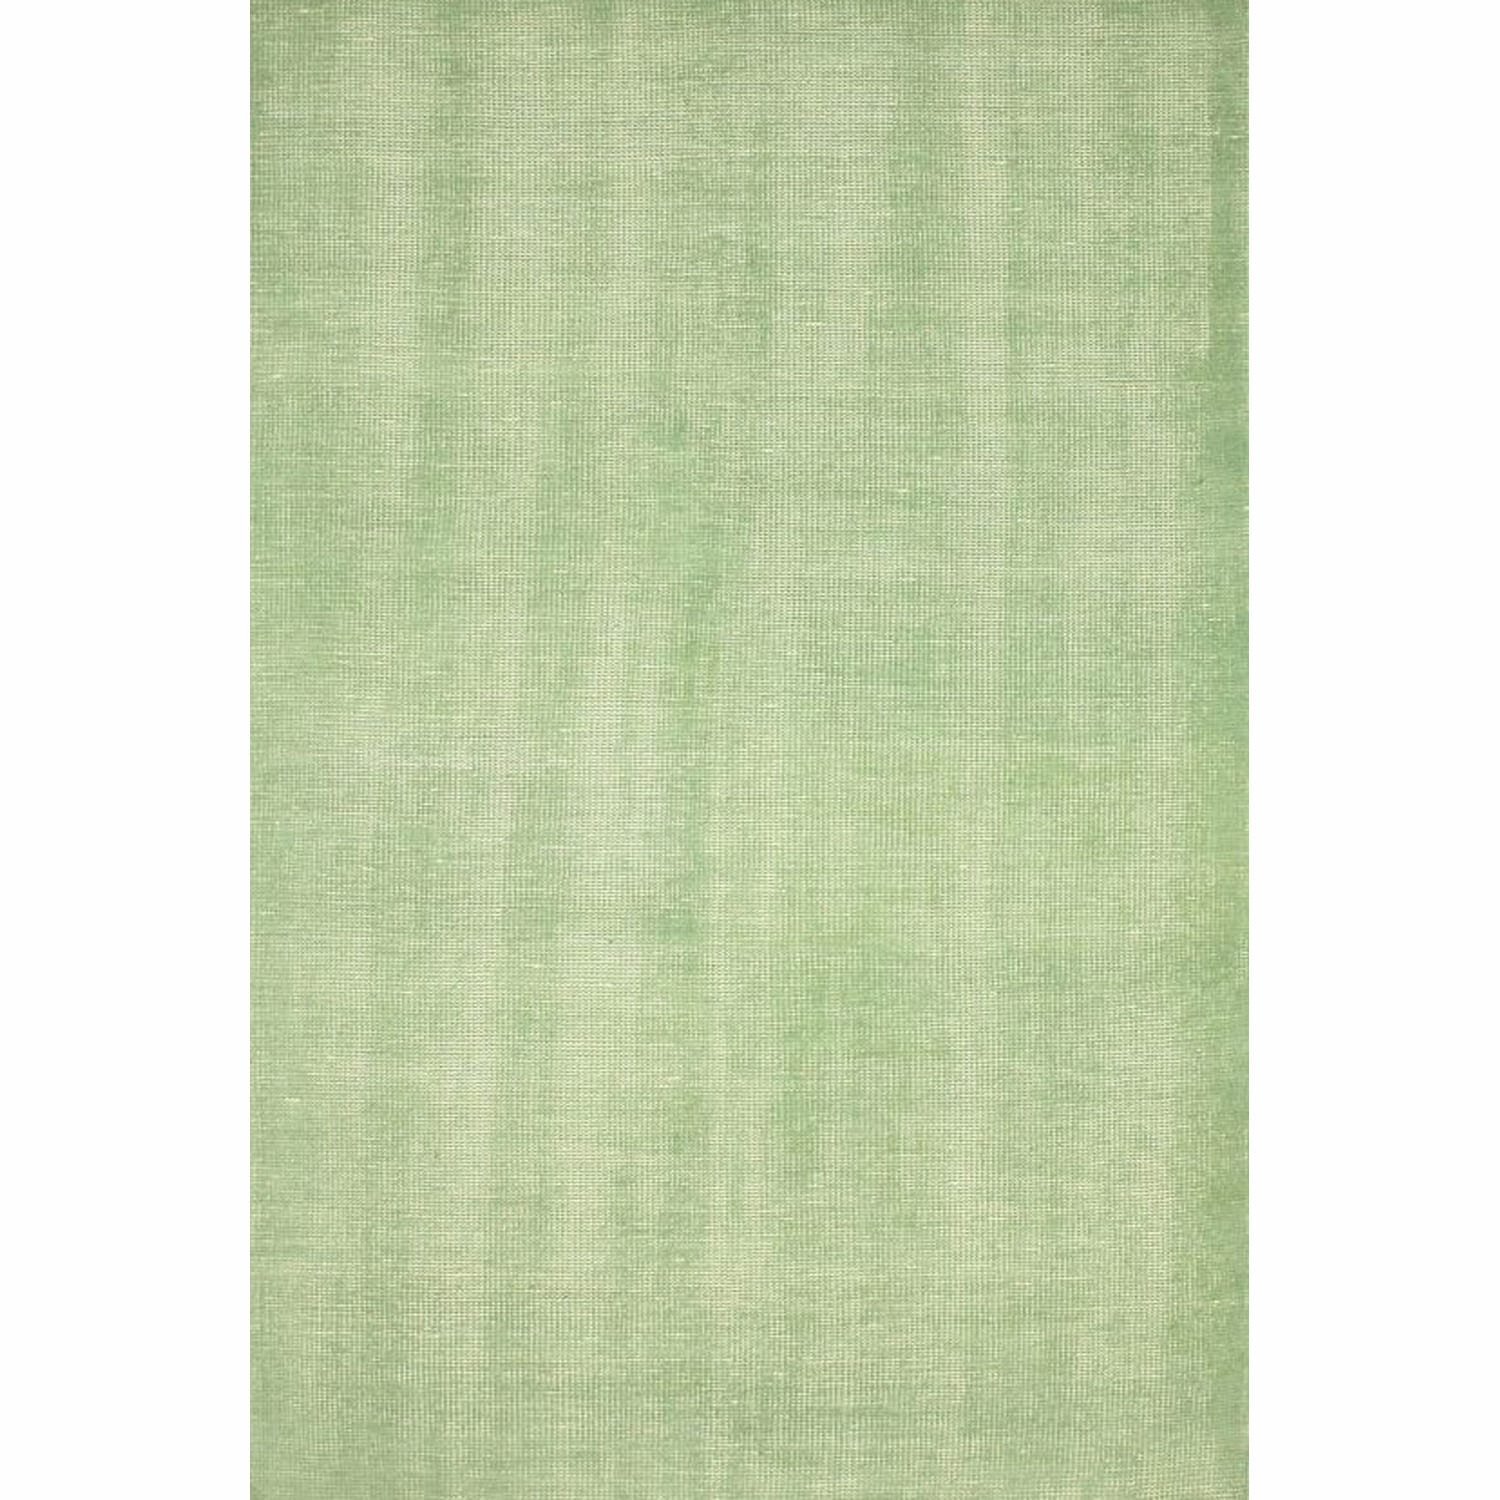 Nuloom Hand knotted Wool Overdyed Solid Green Rug (4 X 6)